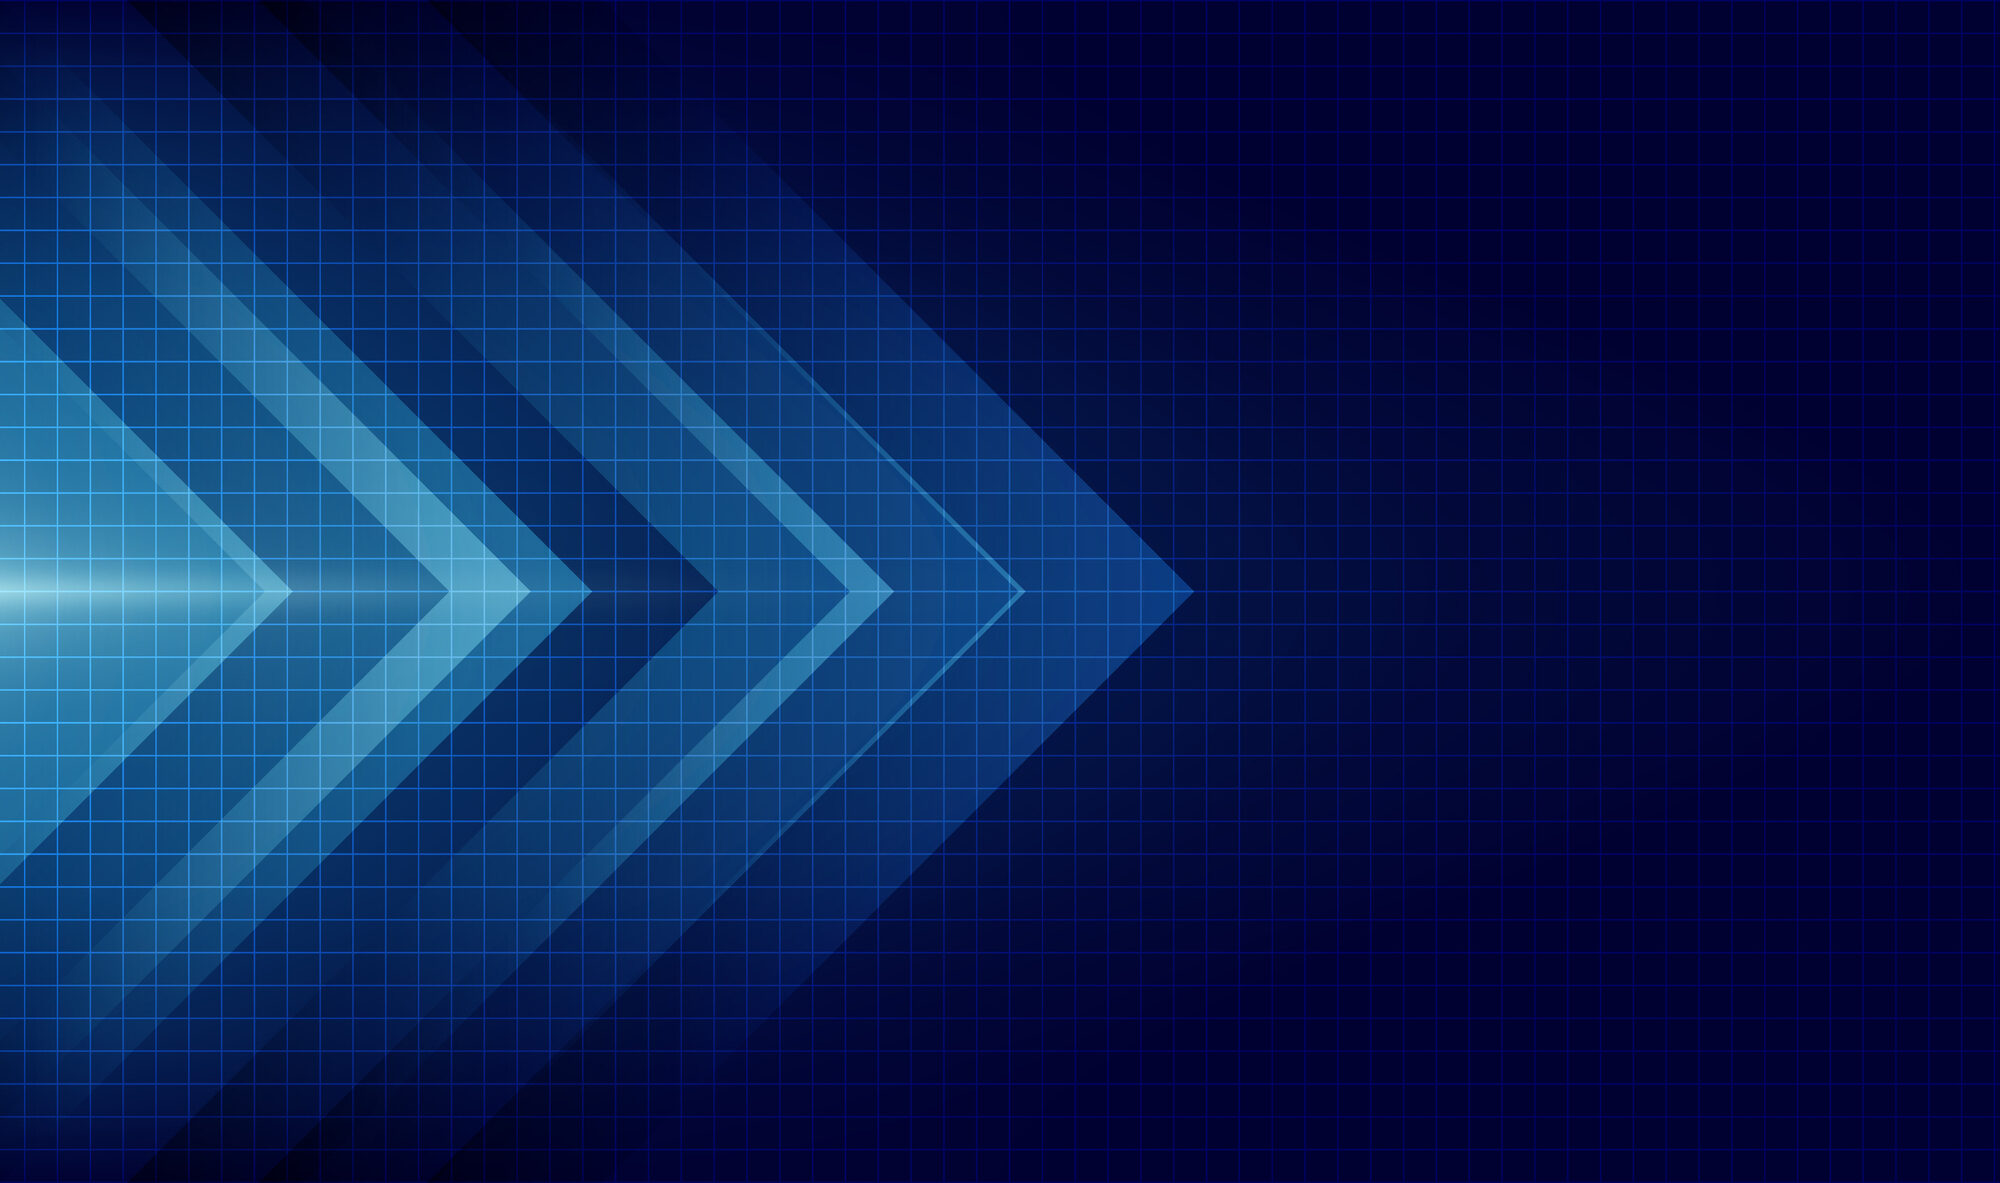 Abstract blue arrow glowing with lighting and line grid on blue background technology hi-tech concept. Vector illustration